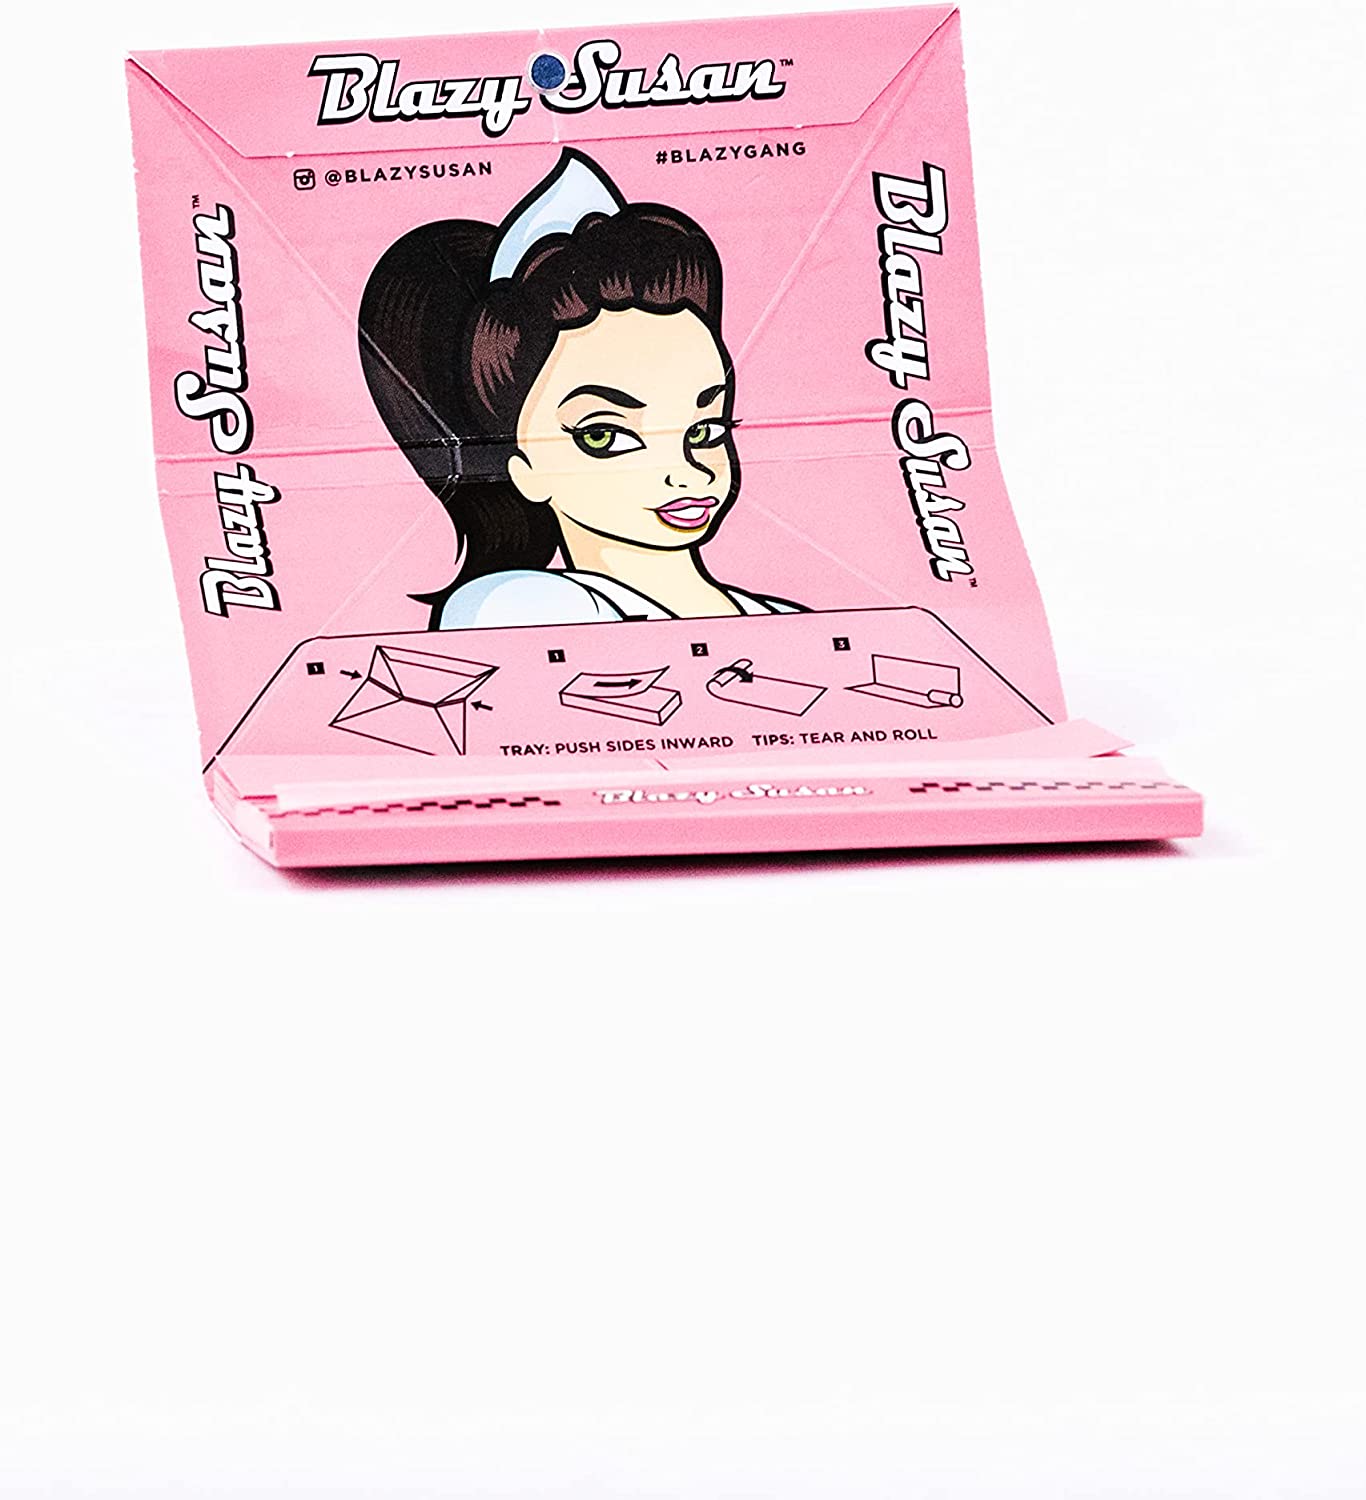 Blazy Susan King Size - Deluxe Pink Papers Rolling Kit